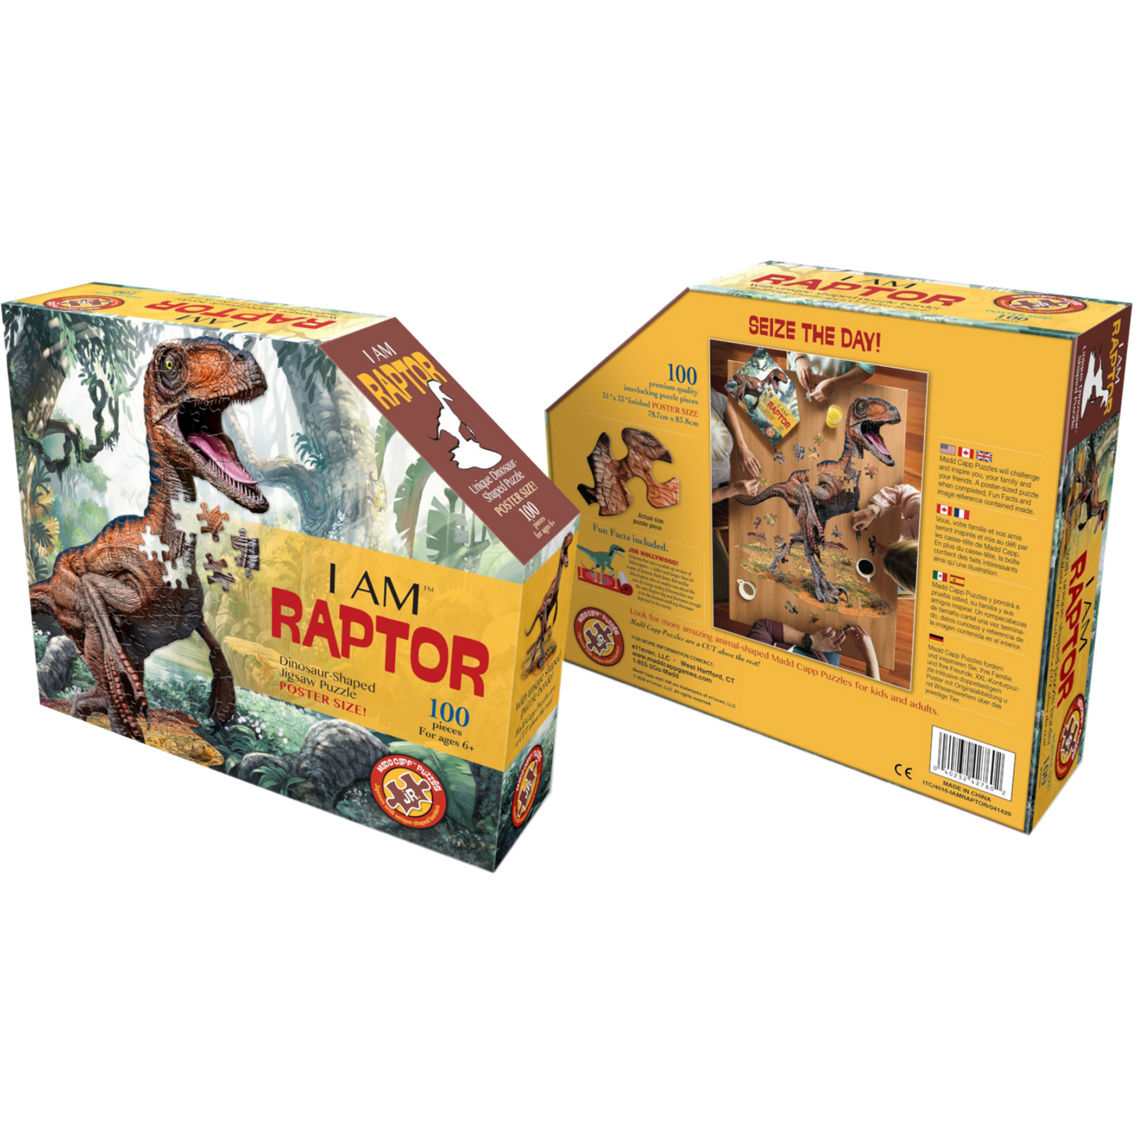 Madd Capp Jr: I Am LiL' Raptor 100 pc. Puzzle - Image 3 of 4